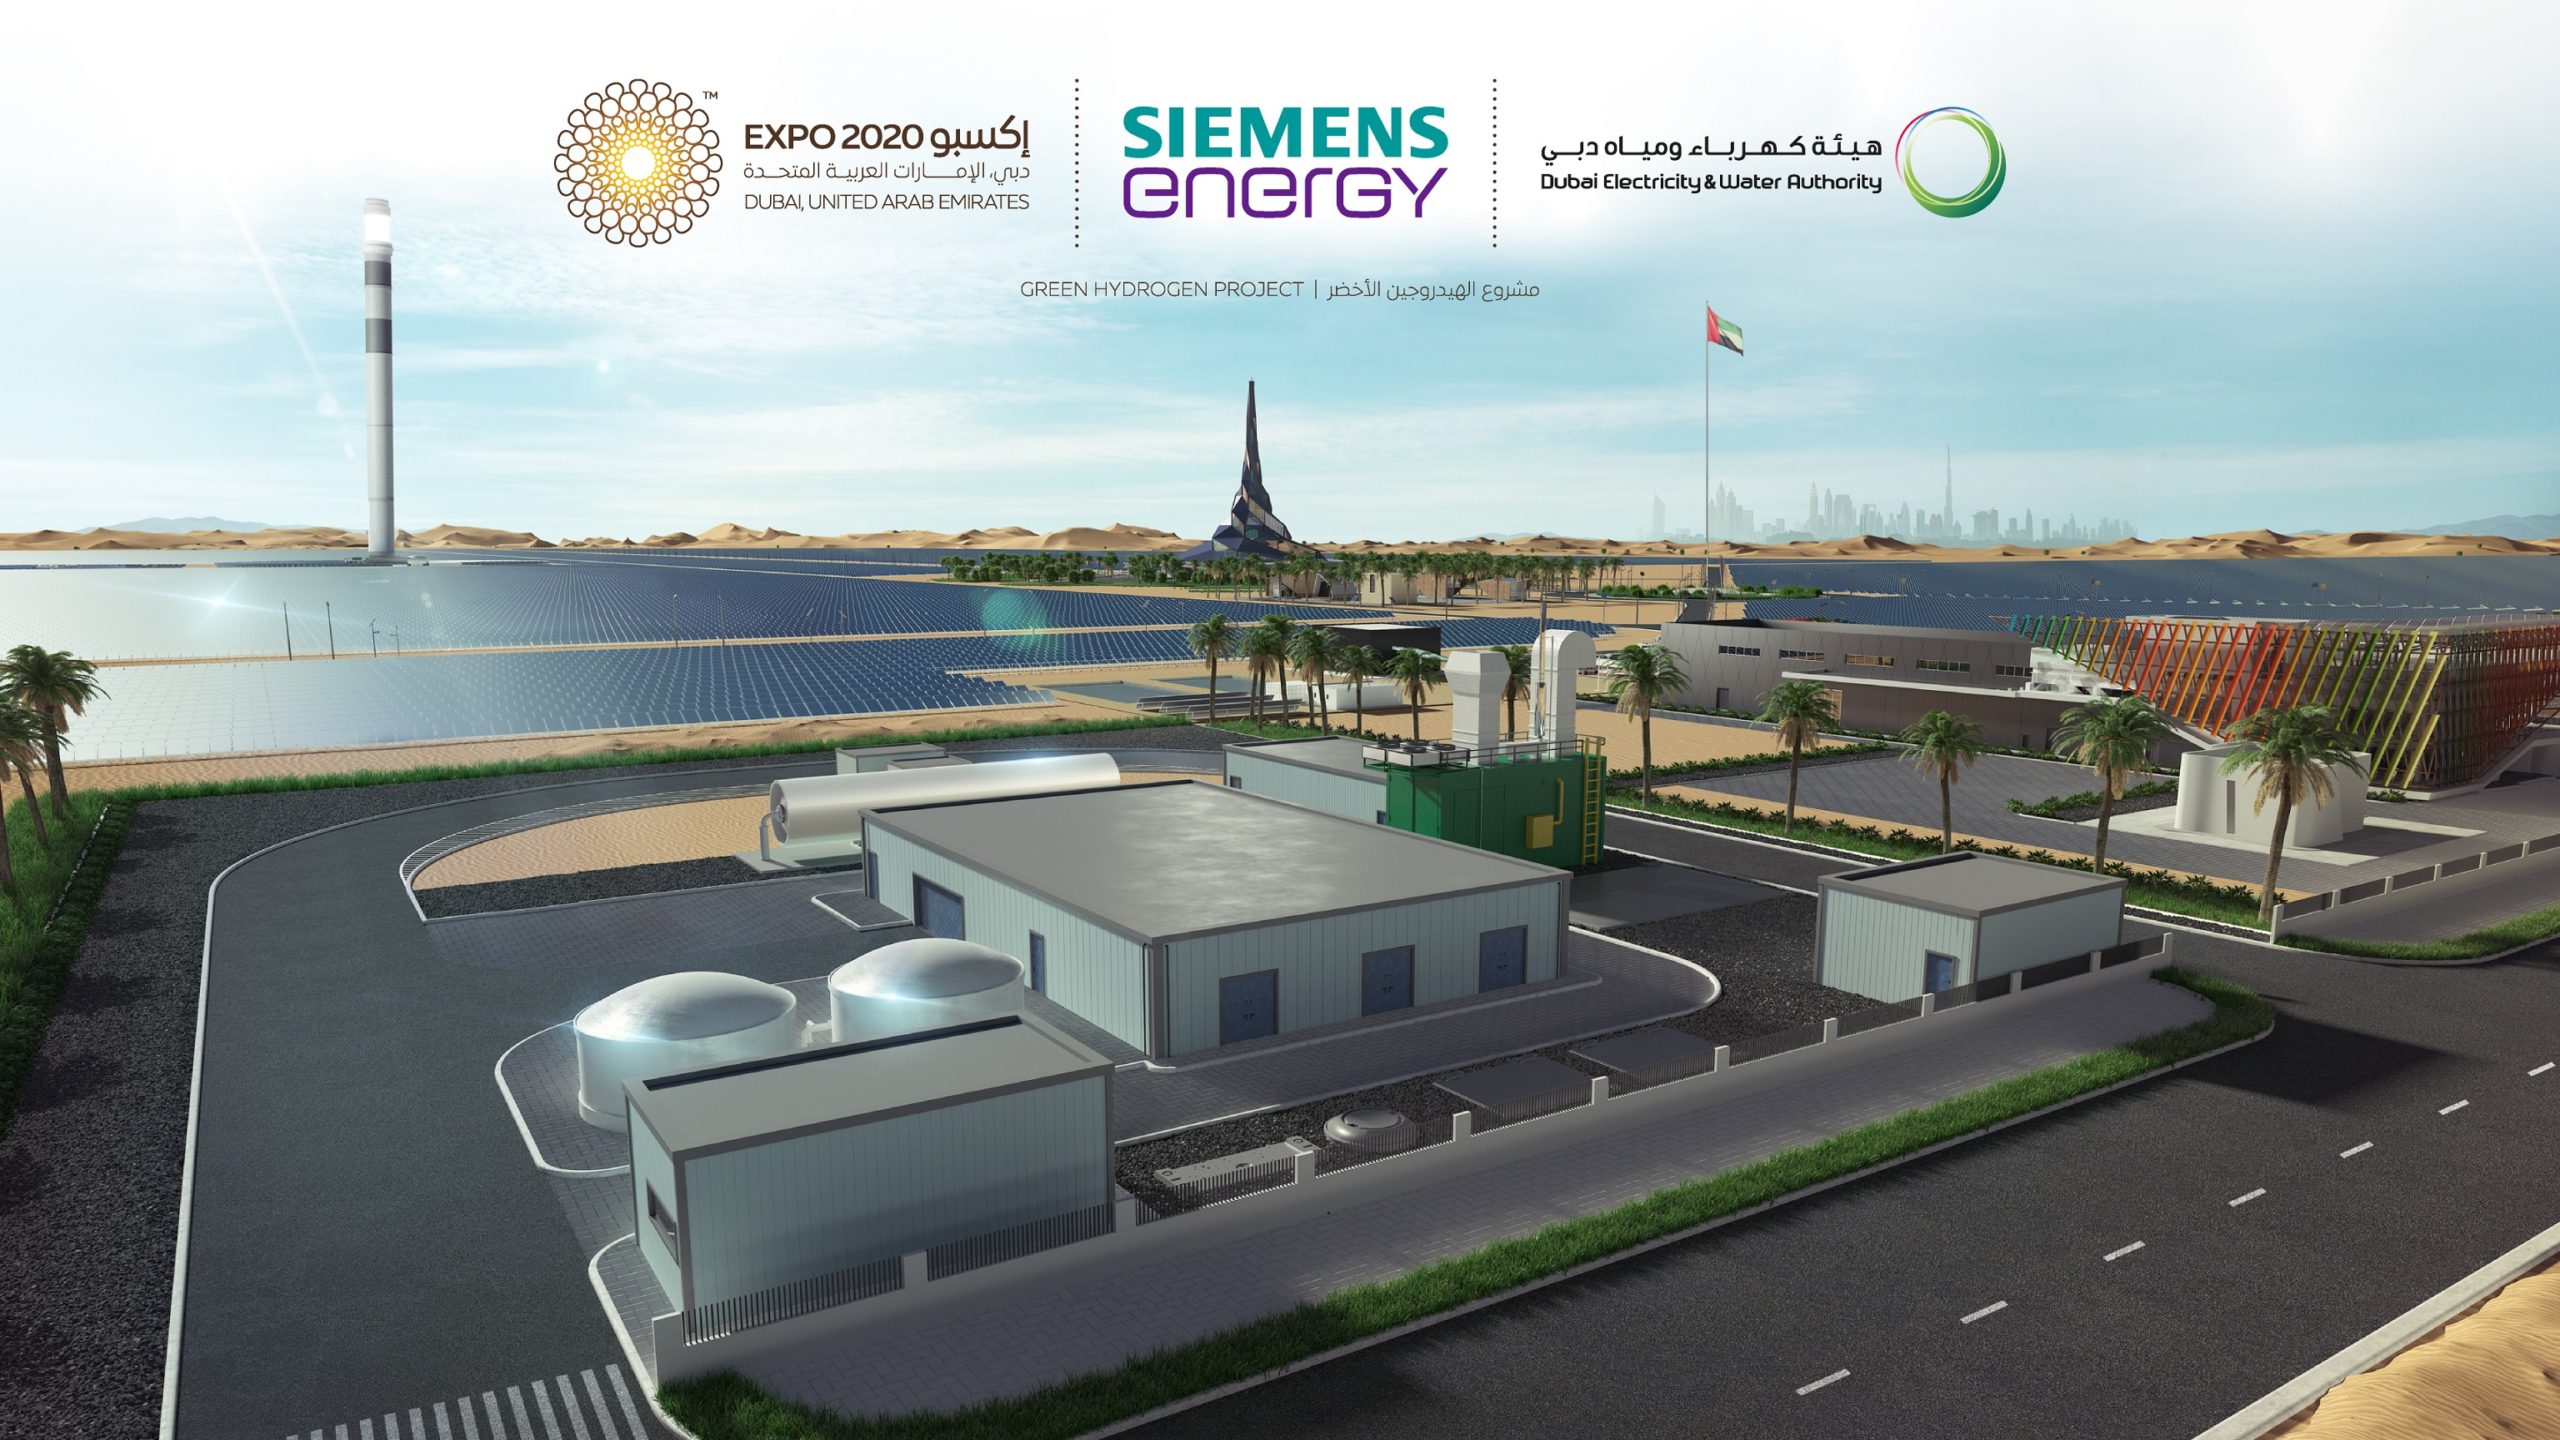 Green Hydrogen is one of DEWA’s solutions to diversify energy sources